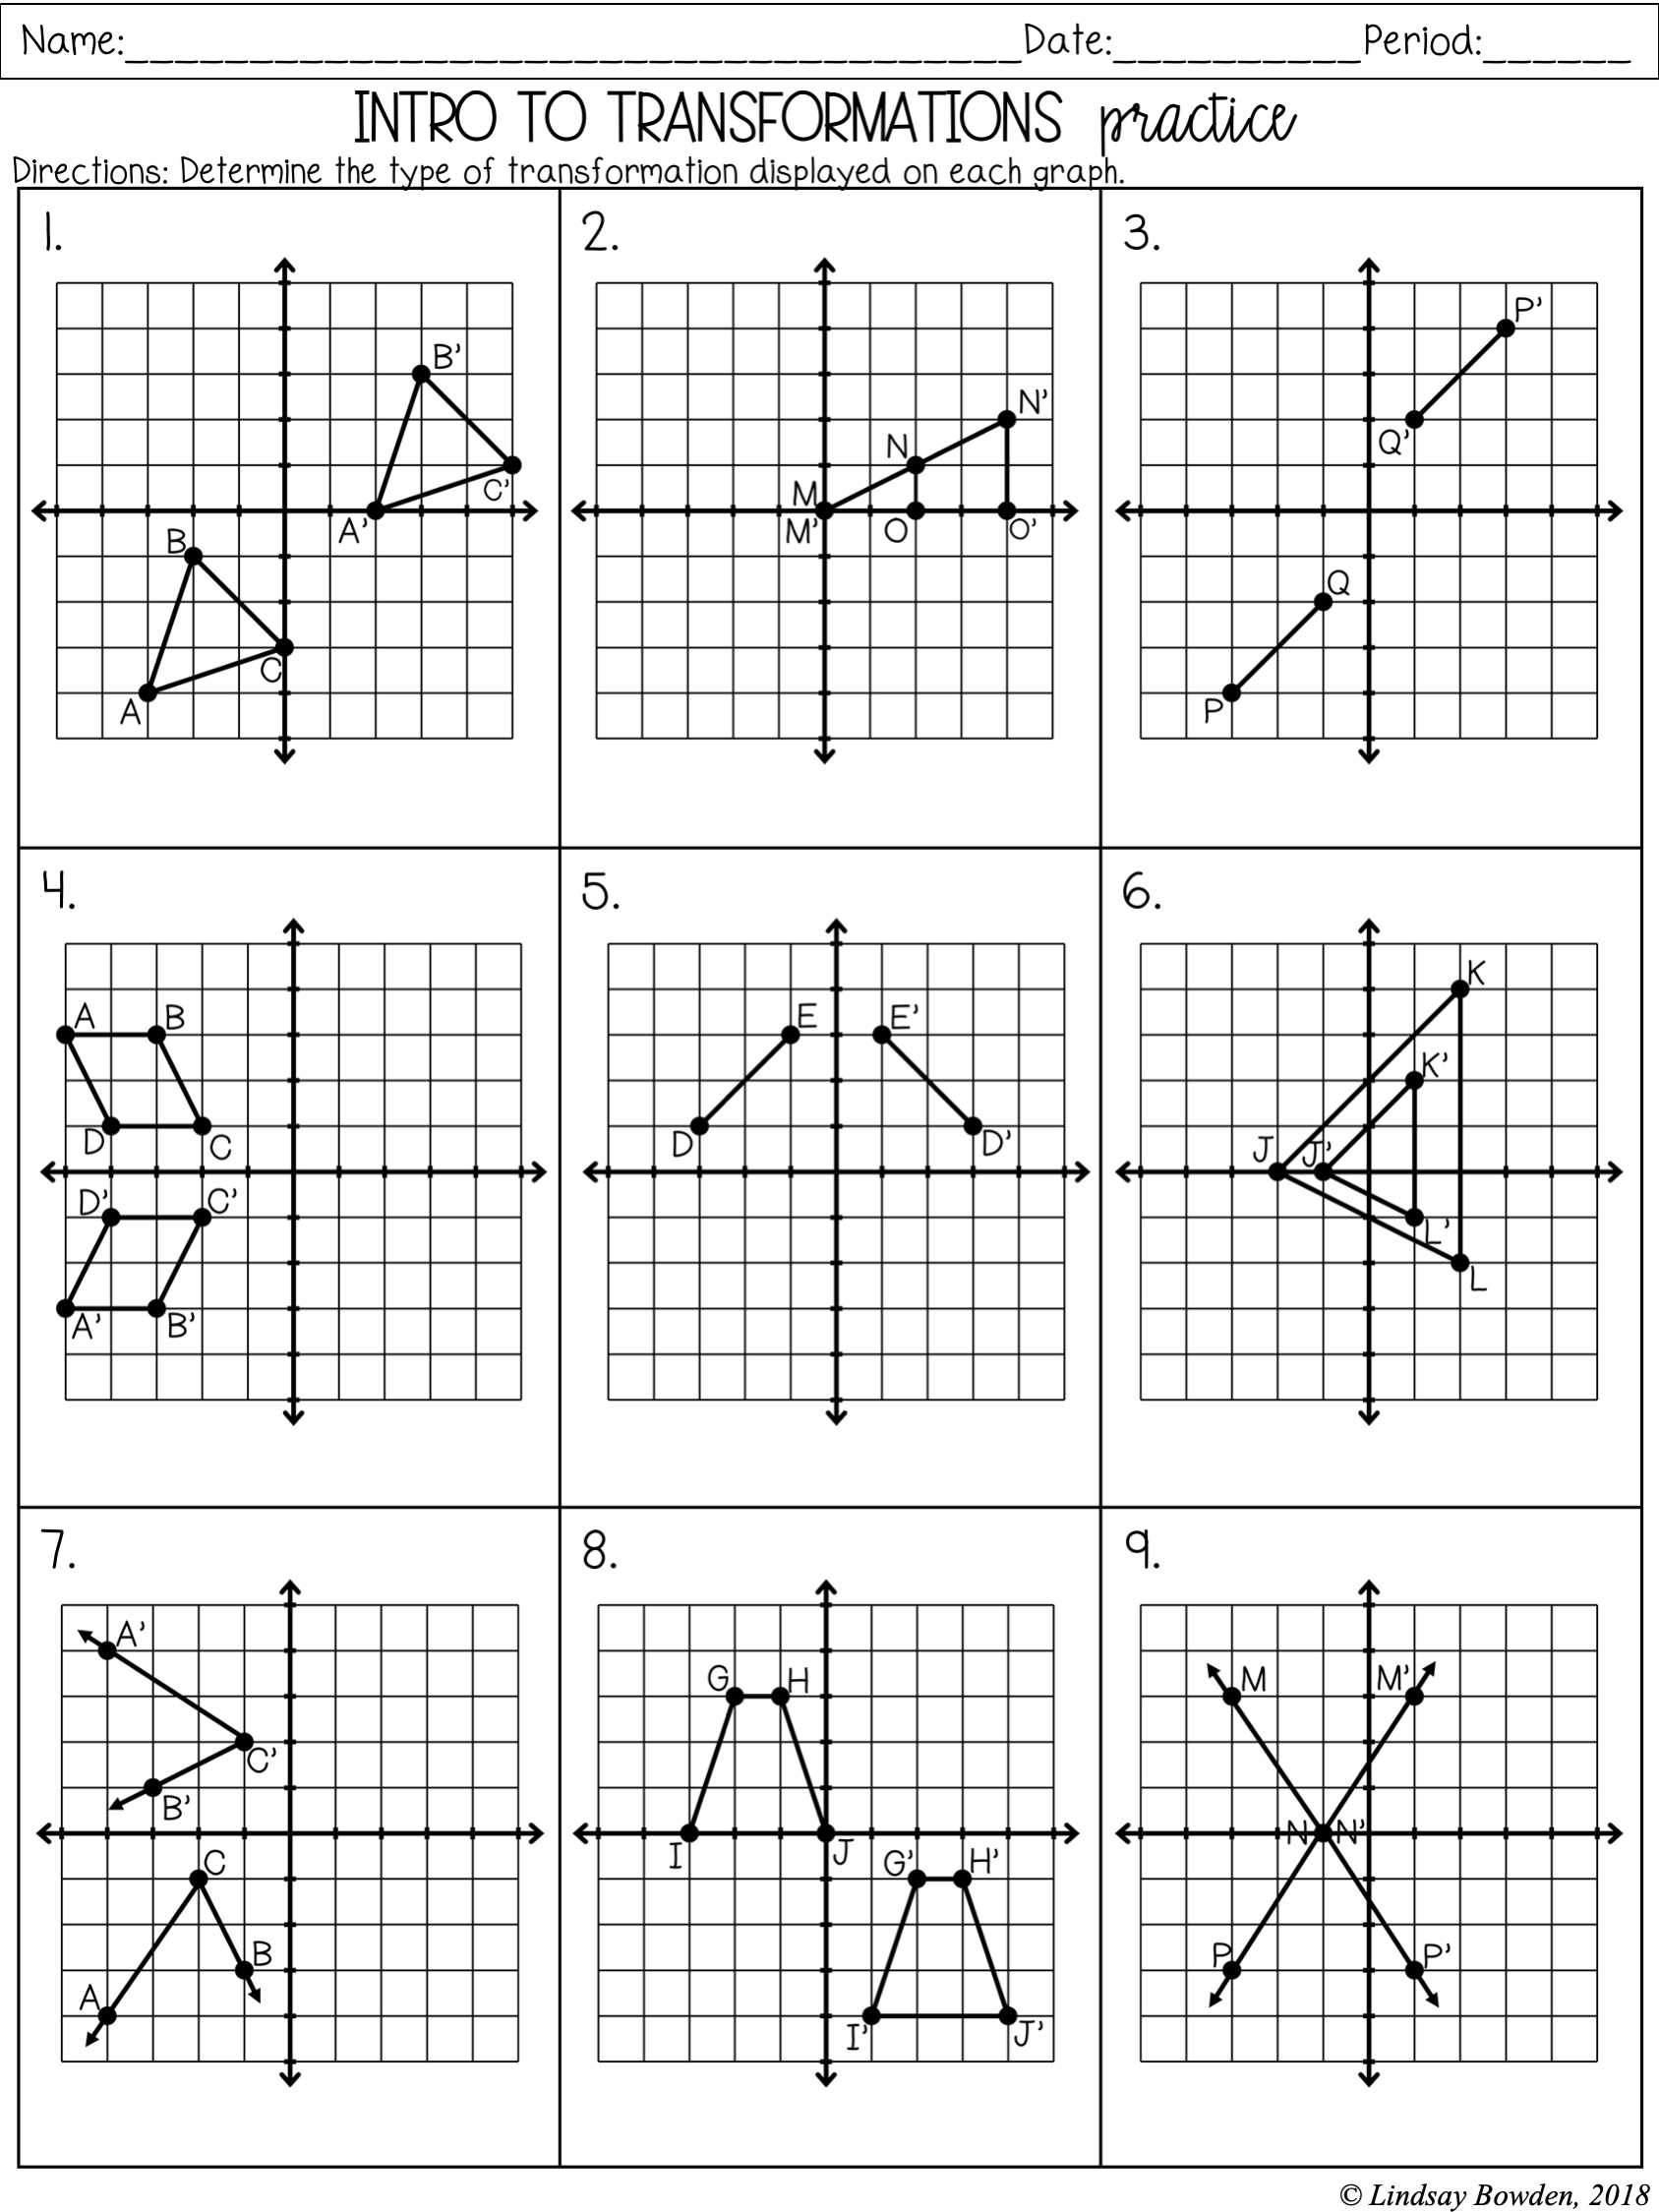 Transformations Notes and Worksheets - Lindsay Bowden For Dilations Worksheet Answer Key